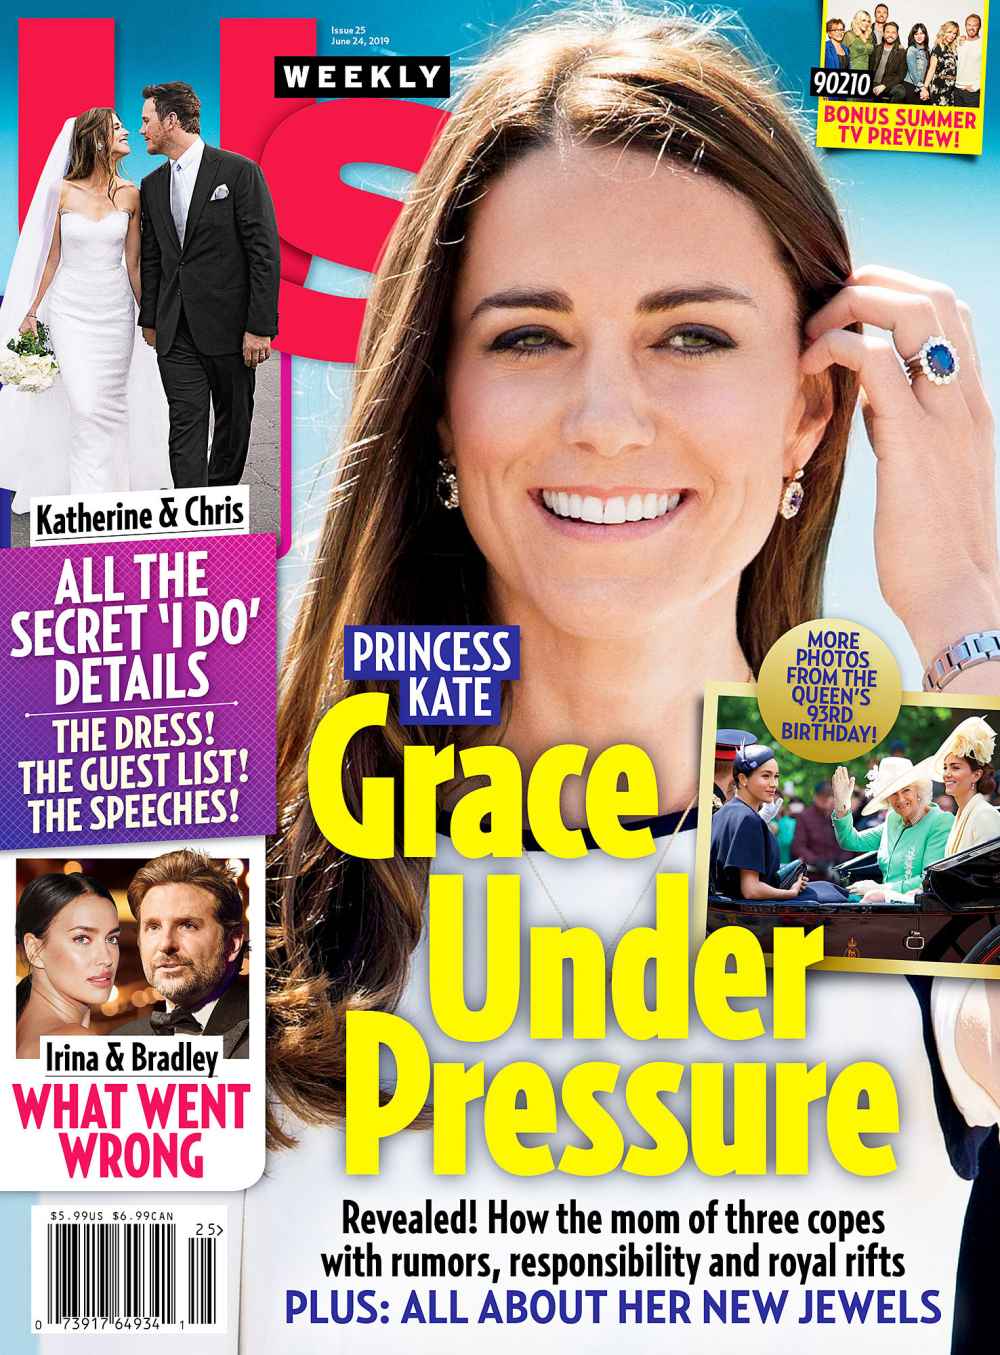 UW2519-Us-Weekly-Cover-Duchess-Kate-Prince William and Kate Ideal Date Night